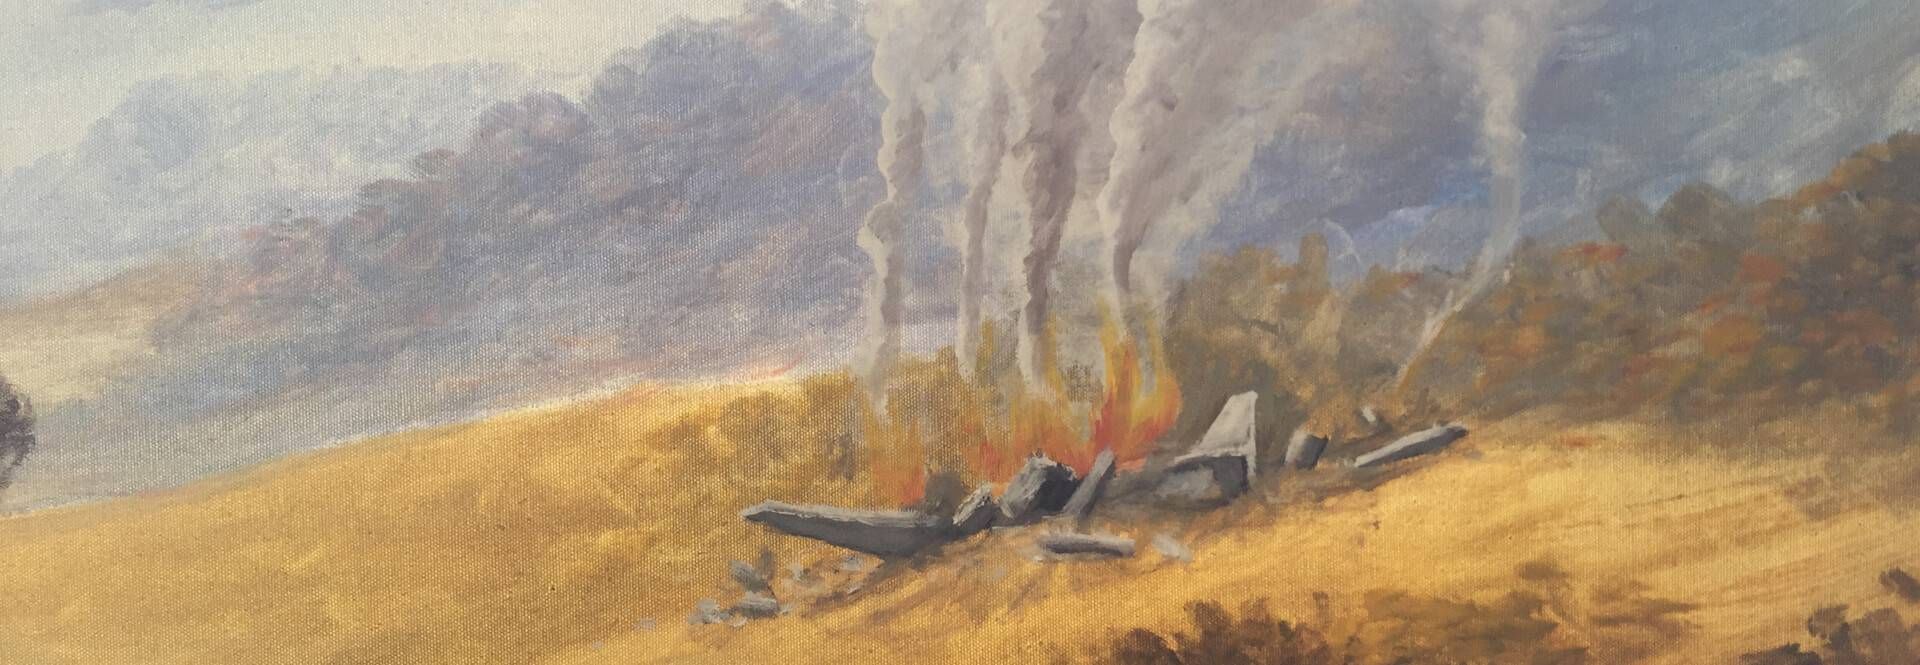 Painting of a crashed plane in a meadow